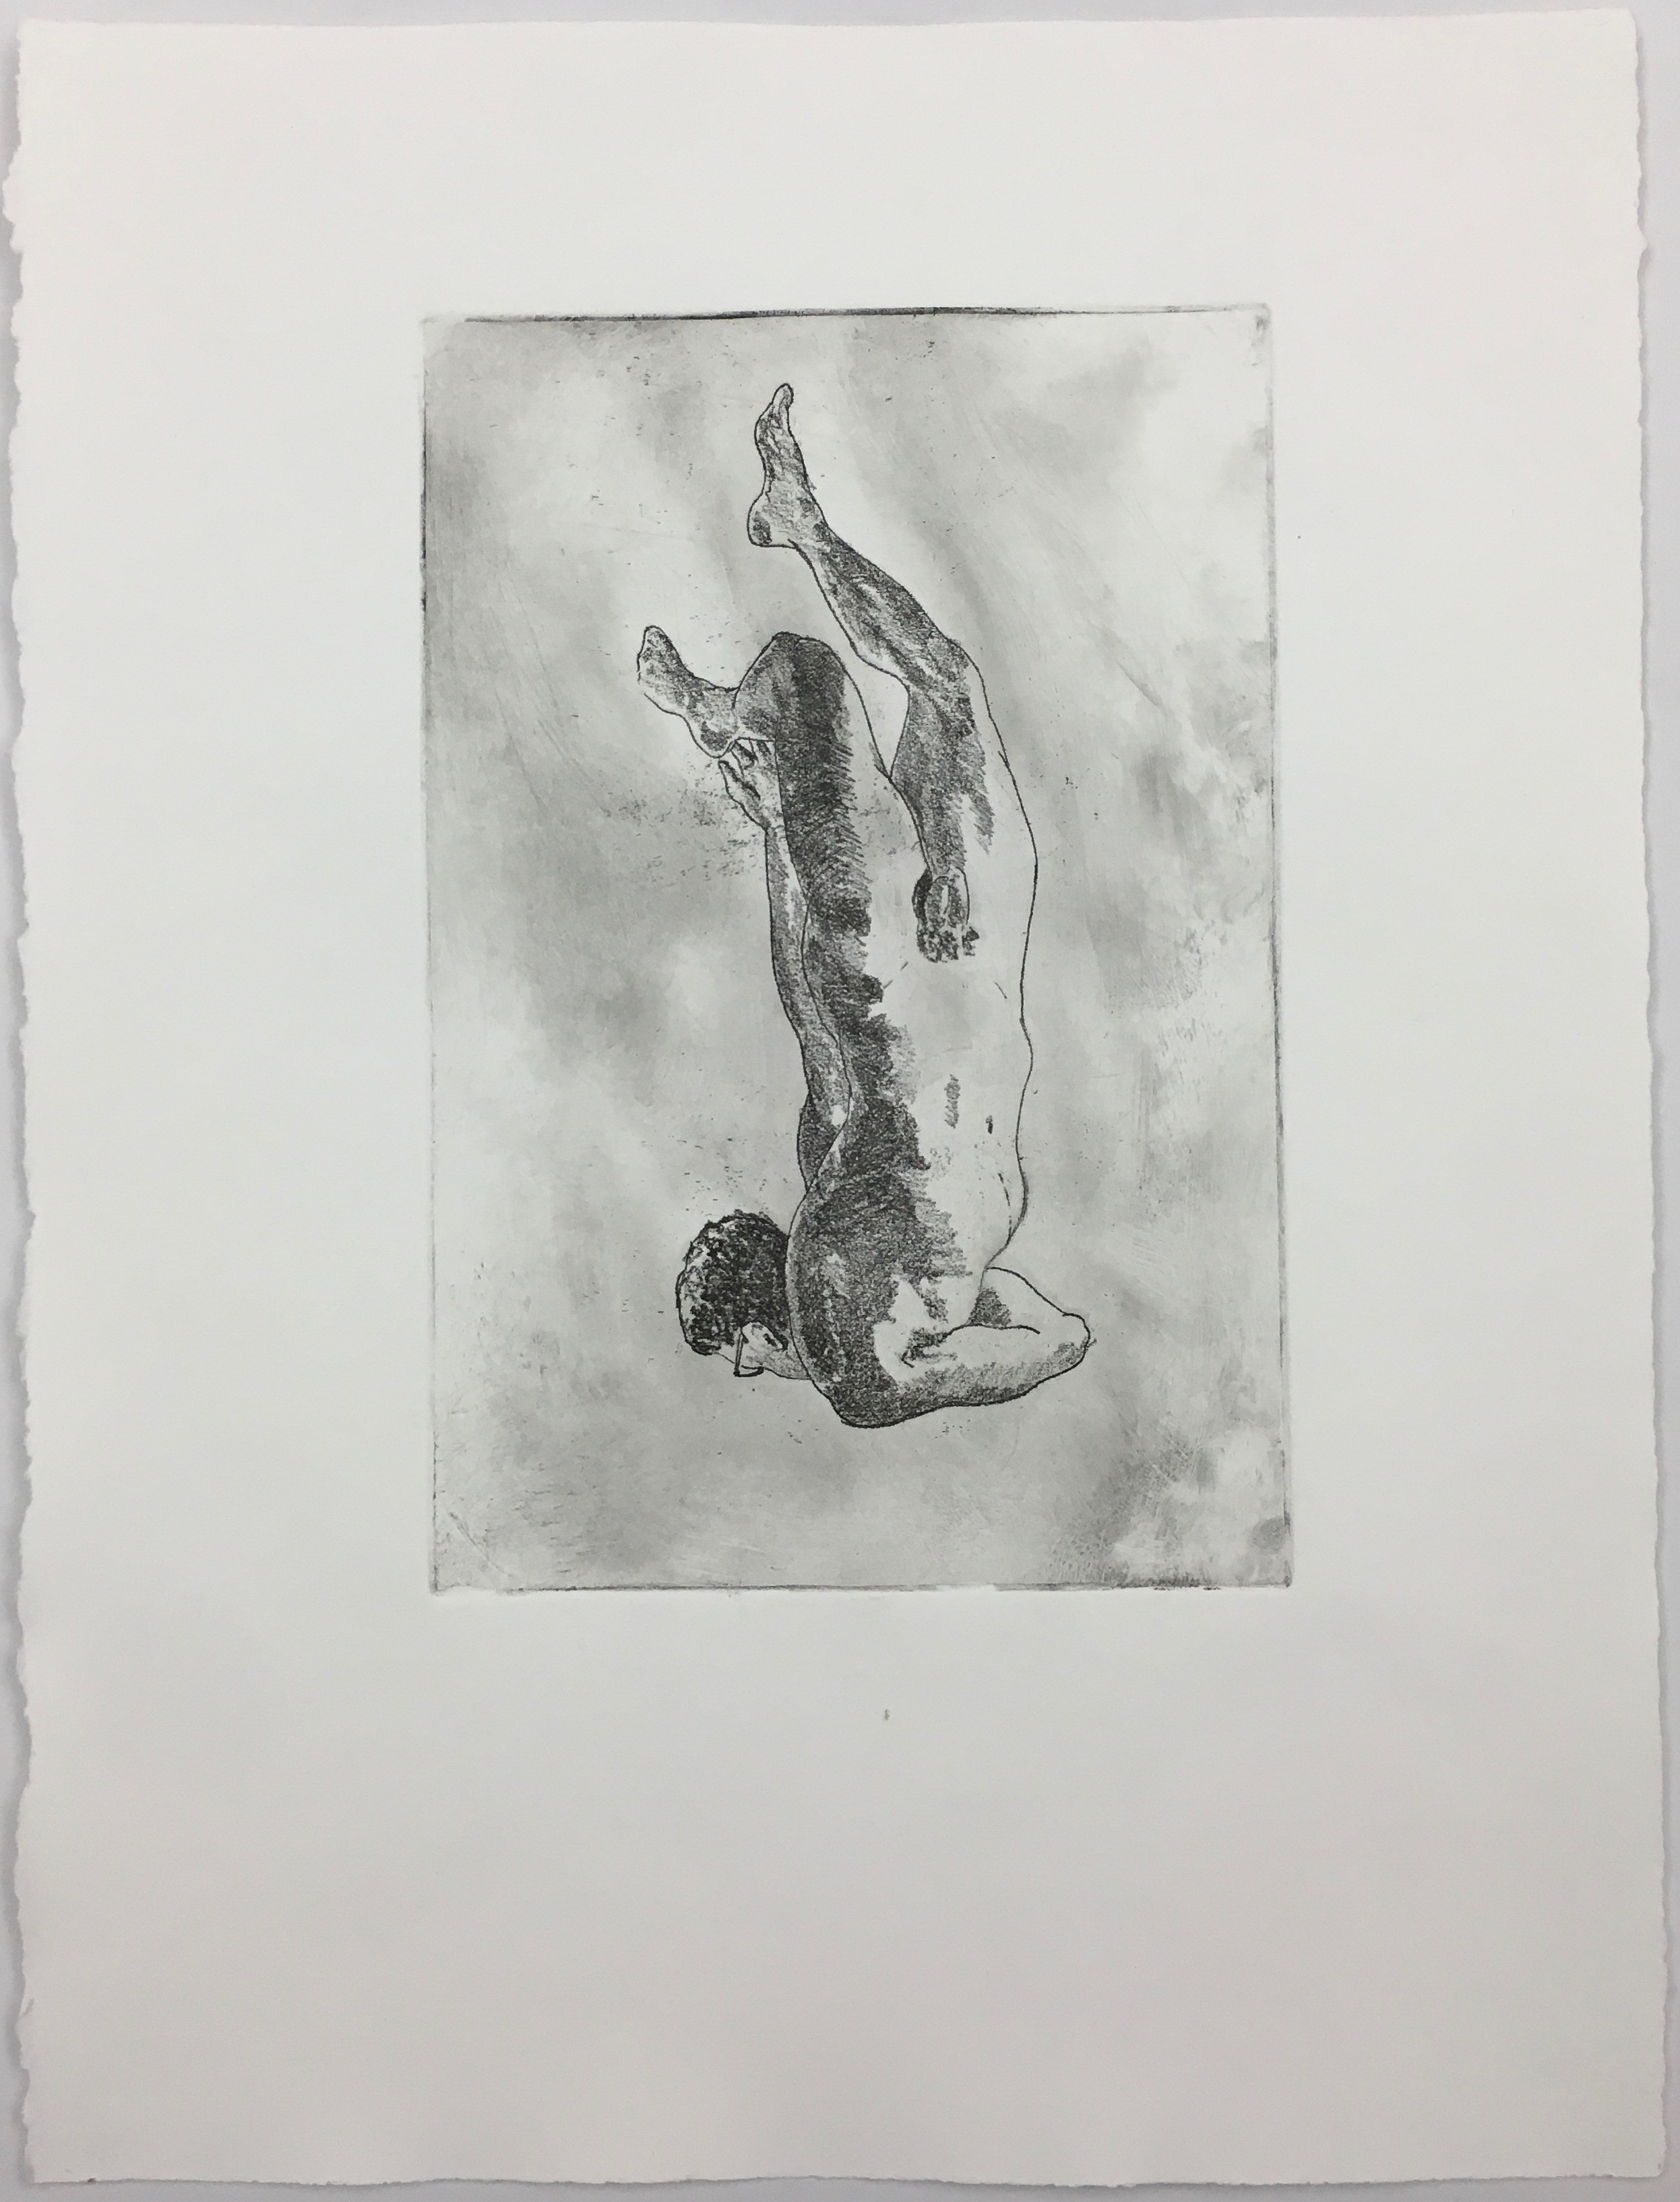 Failed Attempts in the Act of Falling Up: Attempt No. 7, #3, 2019.
                    Monoprint on top of etching on soft ground, 9” x 6” by Karl Daum